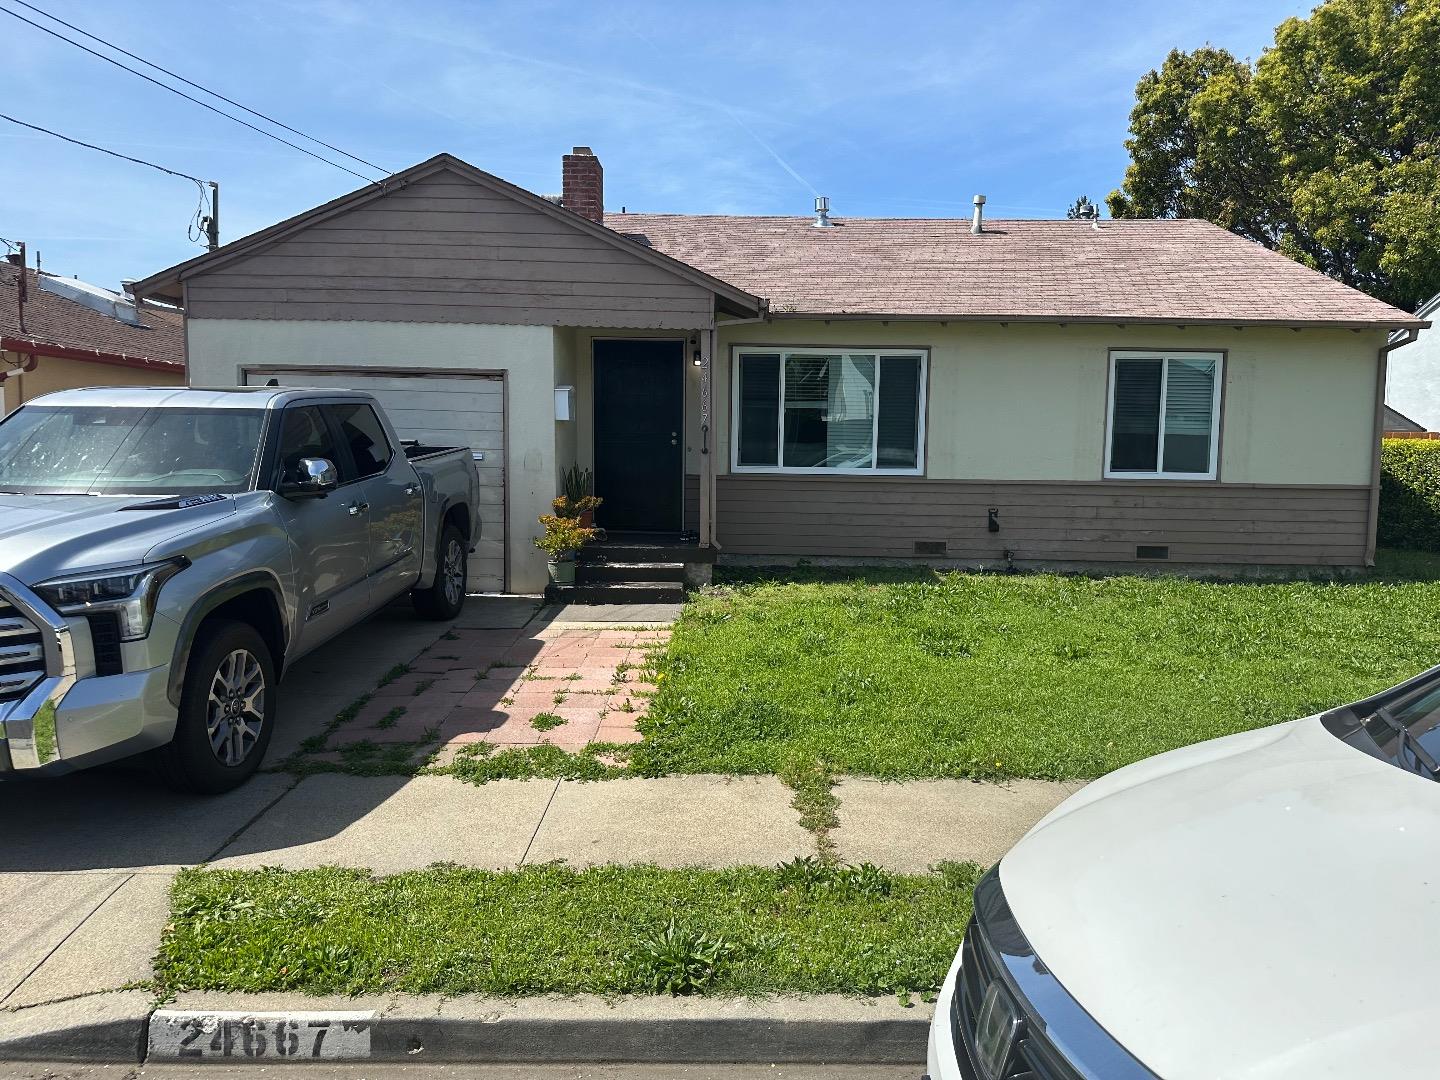 Photo of 24667 Dale St in Hayward, CA